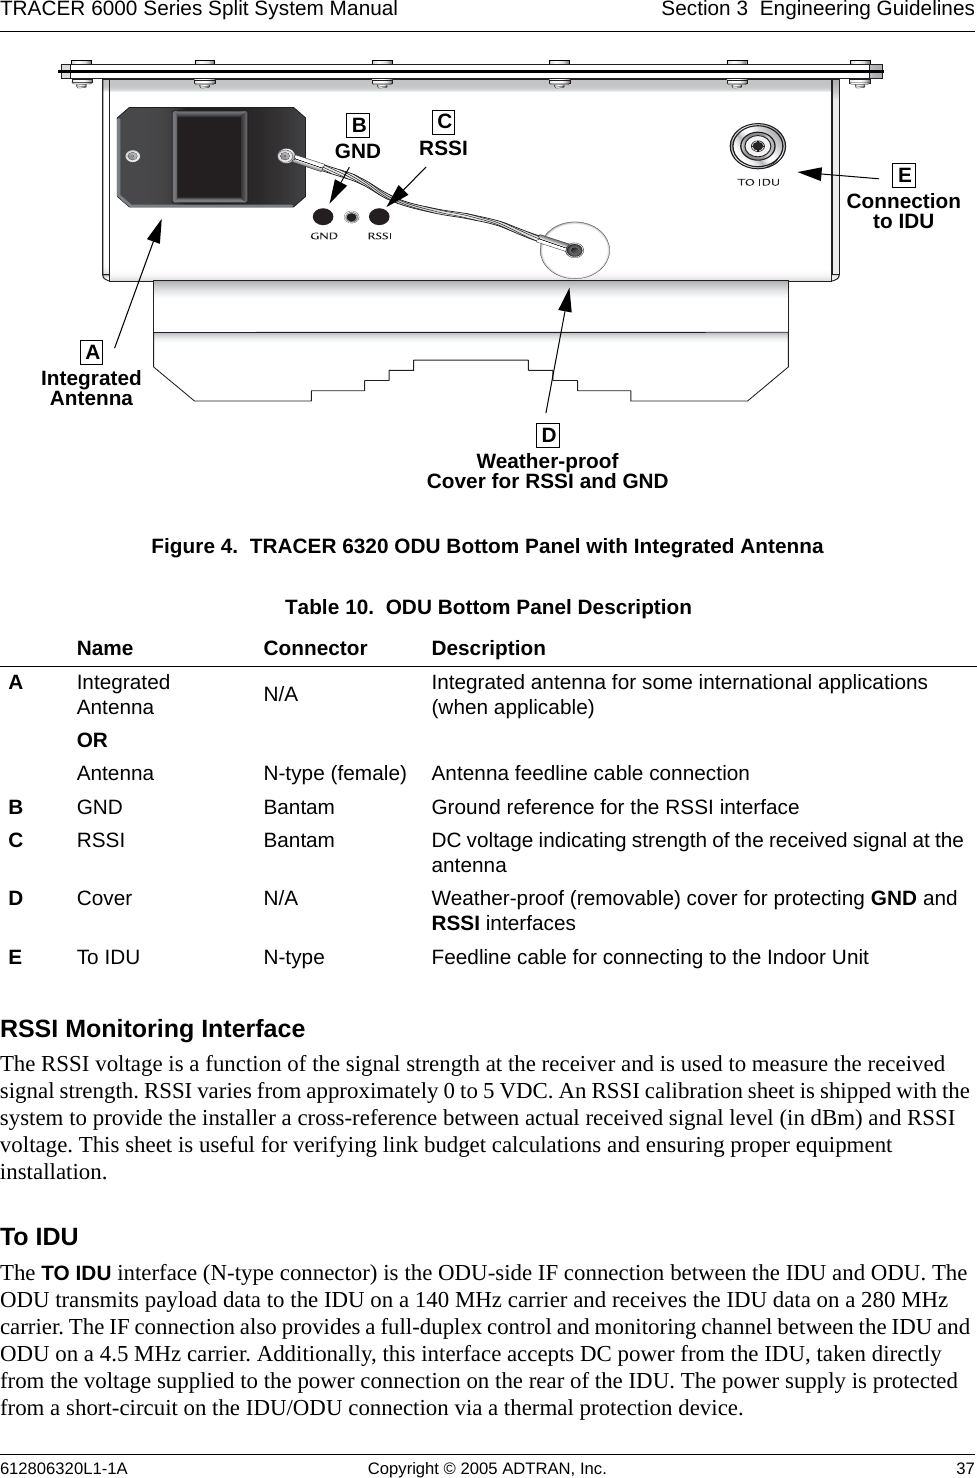 TRACER 6000 Series Split System Manual Section 3  Engineering Guidelines612806320L1-1A Copyright © 2005 ADTRAN, Inc. 37Figure 4.  TRACER 6320 ODU Bottom Panel with Integrated AntennaRSSI Monitoring InterfaceThe RSSI voltage is a function of the signal strength at the receiver and is used to measure the received signal strength. RSSI varies from approximately 0 to 5 VDC. An RSSI calibration sheet is shipped with the system to provide the installer a cross-reference between actual received signal level (in dBm) and RSSI voltage. This sheet is useful for verifying link budget calculations and ensuring proper equipment installation.To IDUThe TO IDU interface (N-type connector) is the ODU-side IF connection between the IDU and ODU. The ODU transmits payload data to the IDU on a 140 MHz carrier and receives the IDU data on a 280 MHz carrier. The IF connection also provides a full-duplex control and monitoring channel between the IDU and ODU on a 4.5 MHz carrier. Additionally, this interface accepts DC power from the IDU, taken directly from the voltage supplied to the power connection on the rear of the IDU. The power supply is protected from a short-circuit on the IDU/ODU connection via a thermal protection device.Table 10.  ODU Bottom Panel DescriptionName Connector DescriptionAIntegrated Antenna N/A Integrated antenna for some international applications (when applicable)ORAntenna  N-type (female) Antenna feedline cable connectionBGND Bantam Ground reference for the RSSI interfaceCRSSI Bantam DC voltage indicating strength of the received signal at the antennaDCover N/A Weather-proof (removable) cover for protecting GND and RSSI interfacesETo IDU N-type Feedline cable for connecting to the Indoor UnitIntegratedAntennaAGNDBRSSICWeather-proofCover for RSSI and GNDDConnectionto IDUE